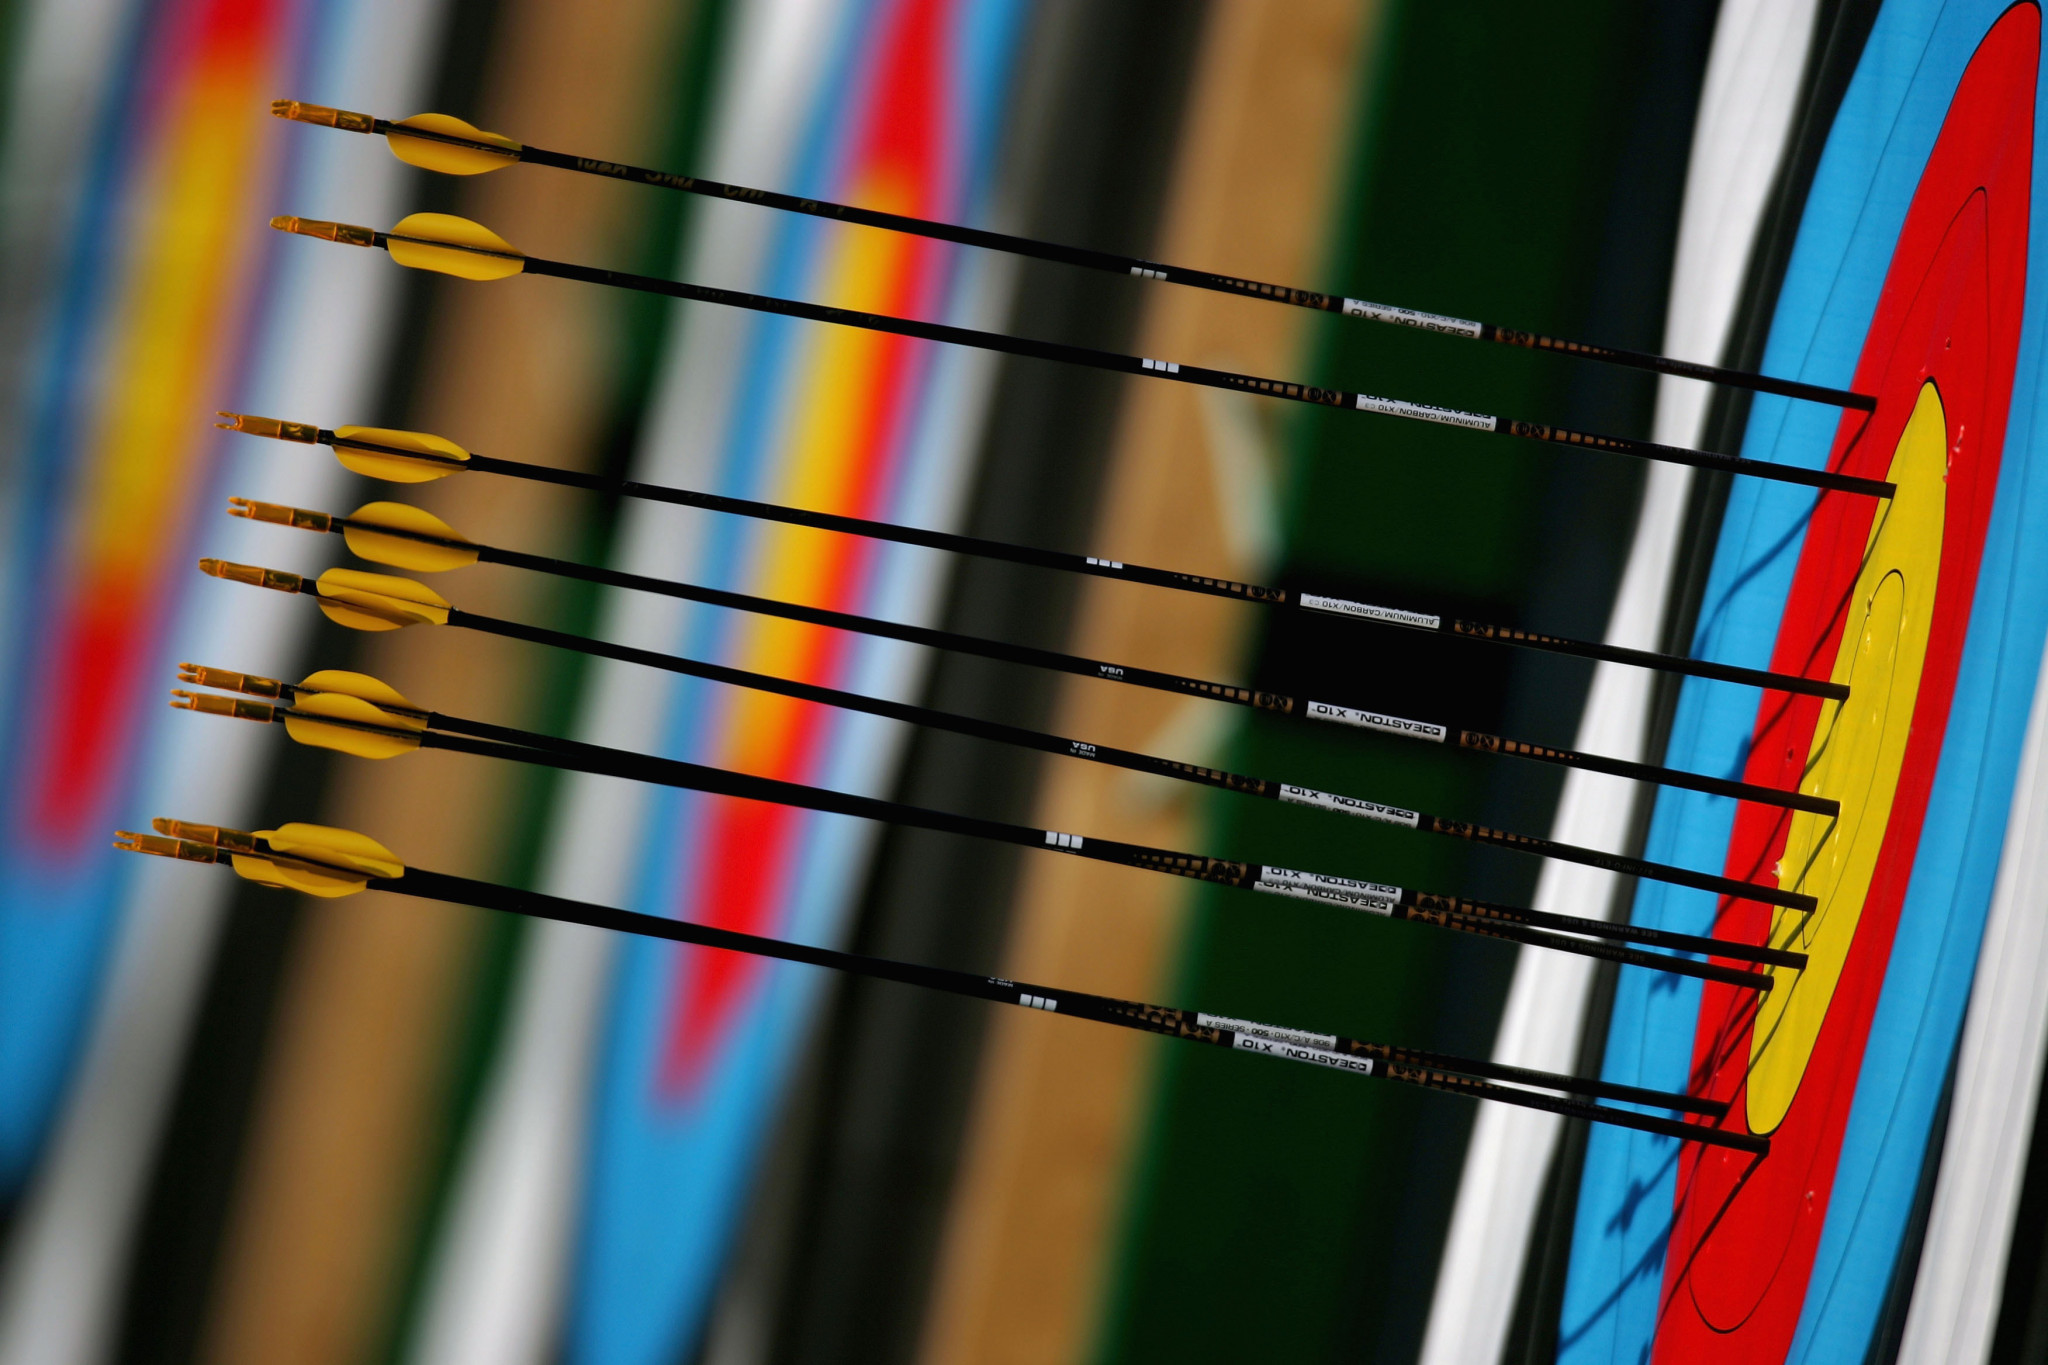 Belgium's Ruben Vanhollebeke successfully defended his visually impaired title at the World Archery Para Championships ©Getty Images